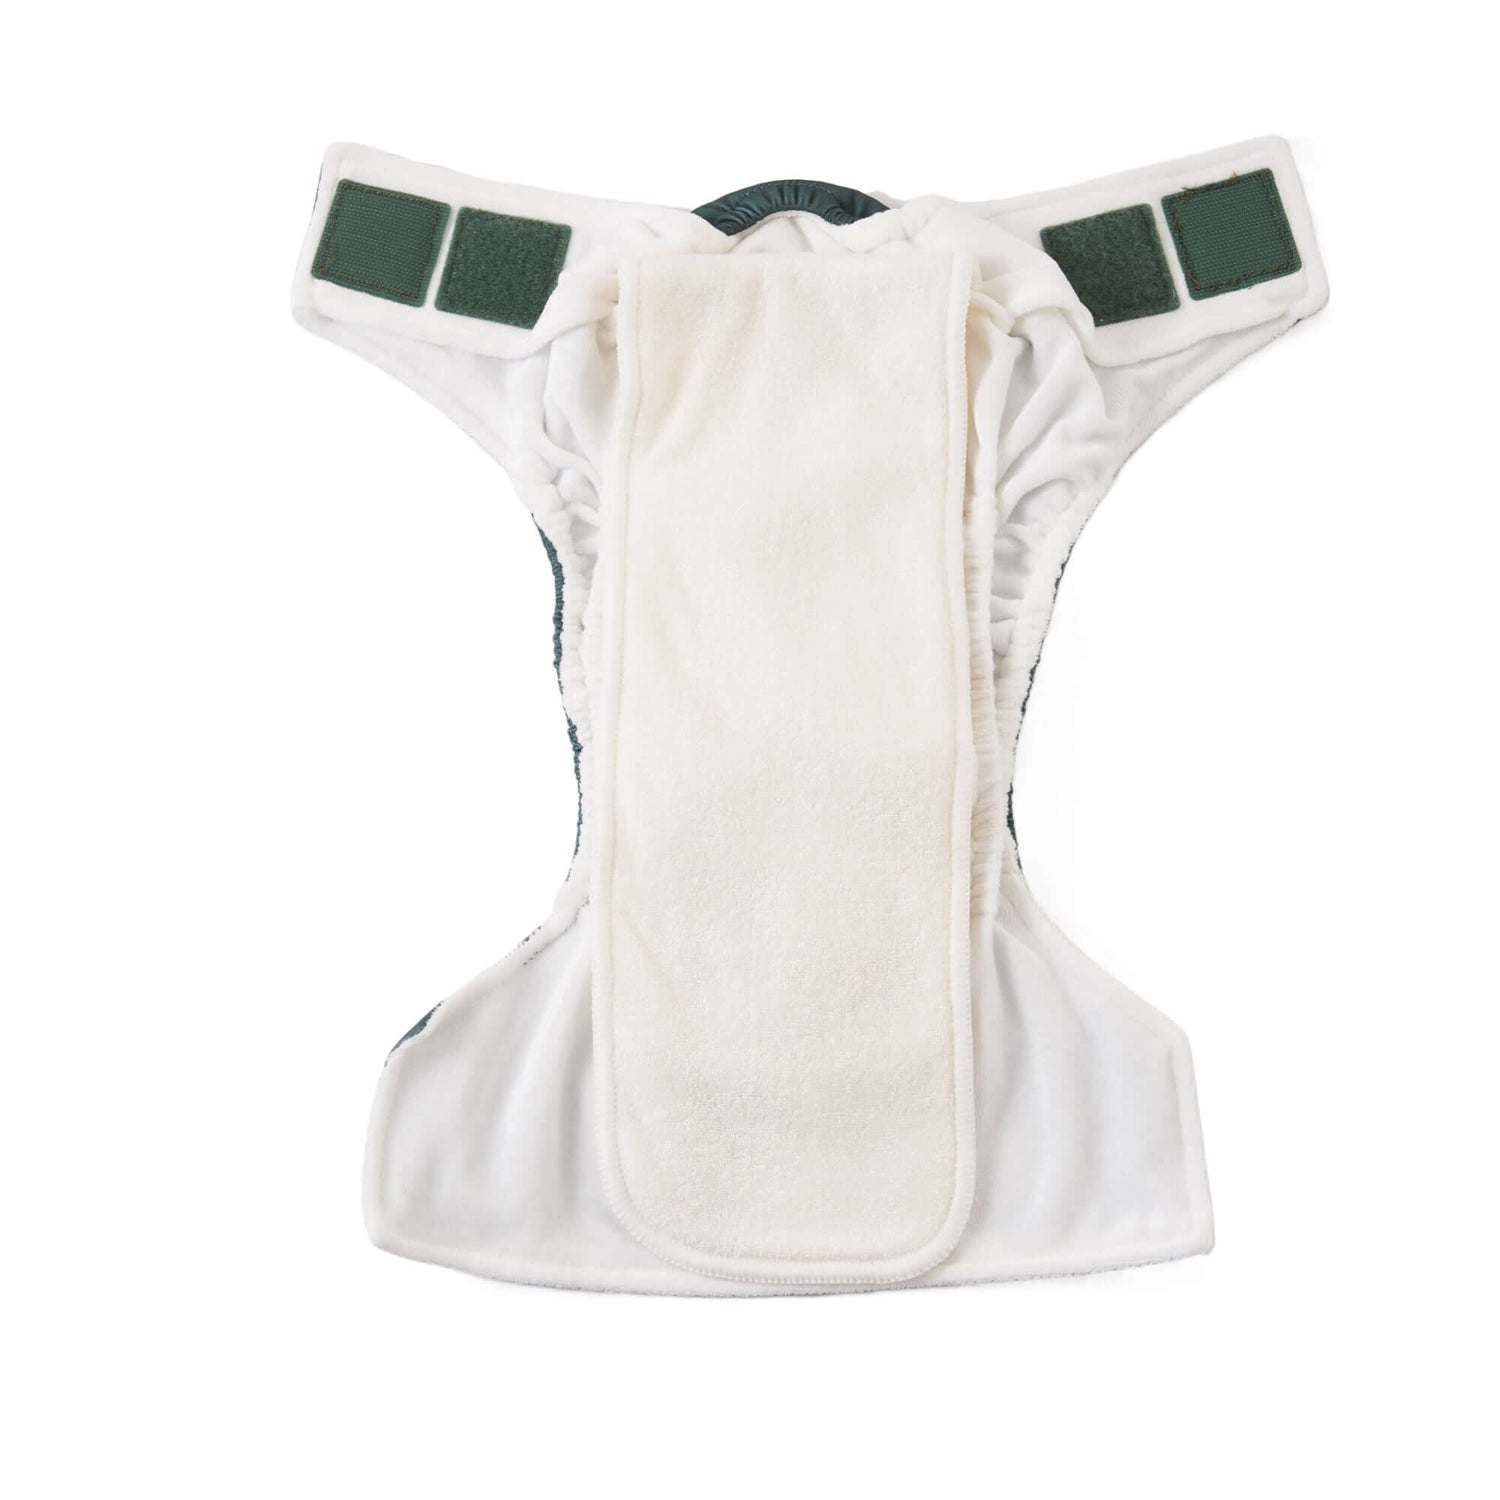 HappyBear Diapers All-In-One luier | Olive